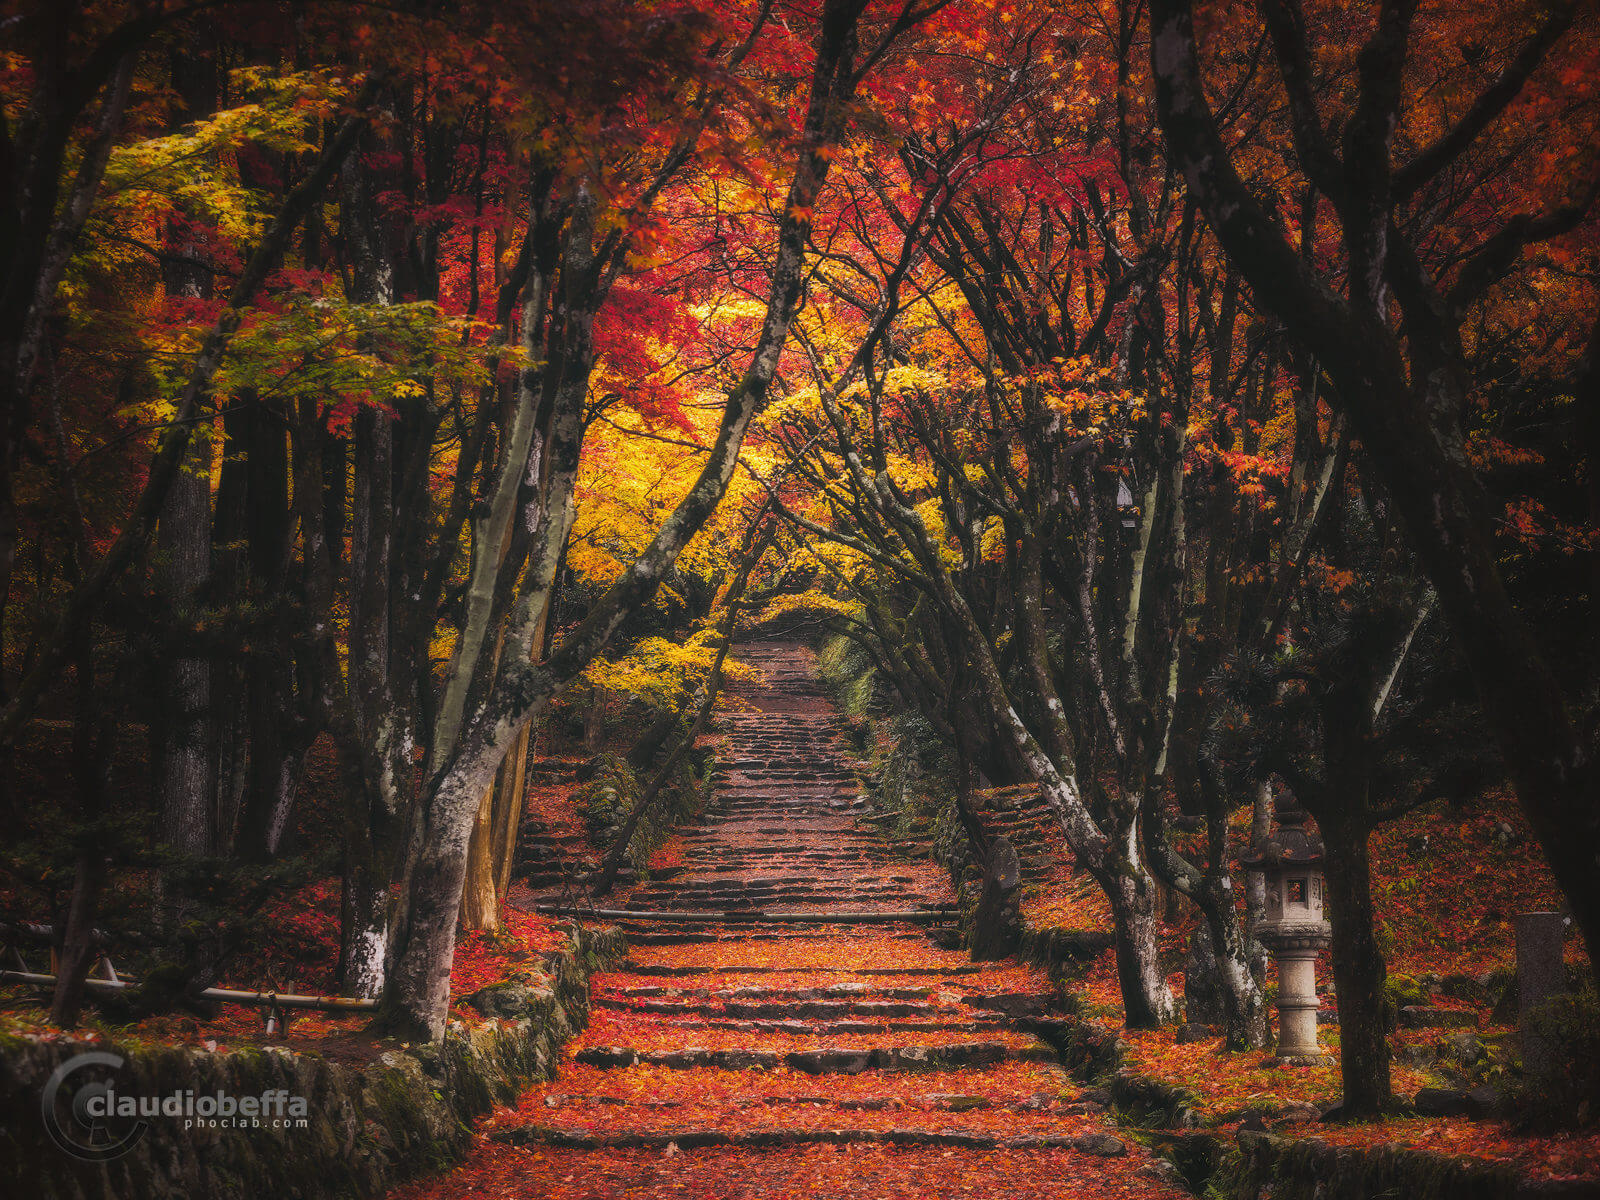 path to the forbidden forest, Shrine, Forest, Momiji, Autumn, Japan, Nature, Travel